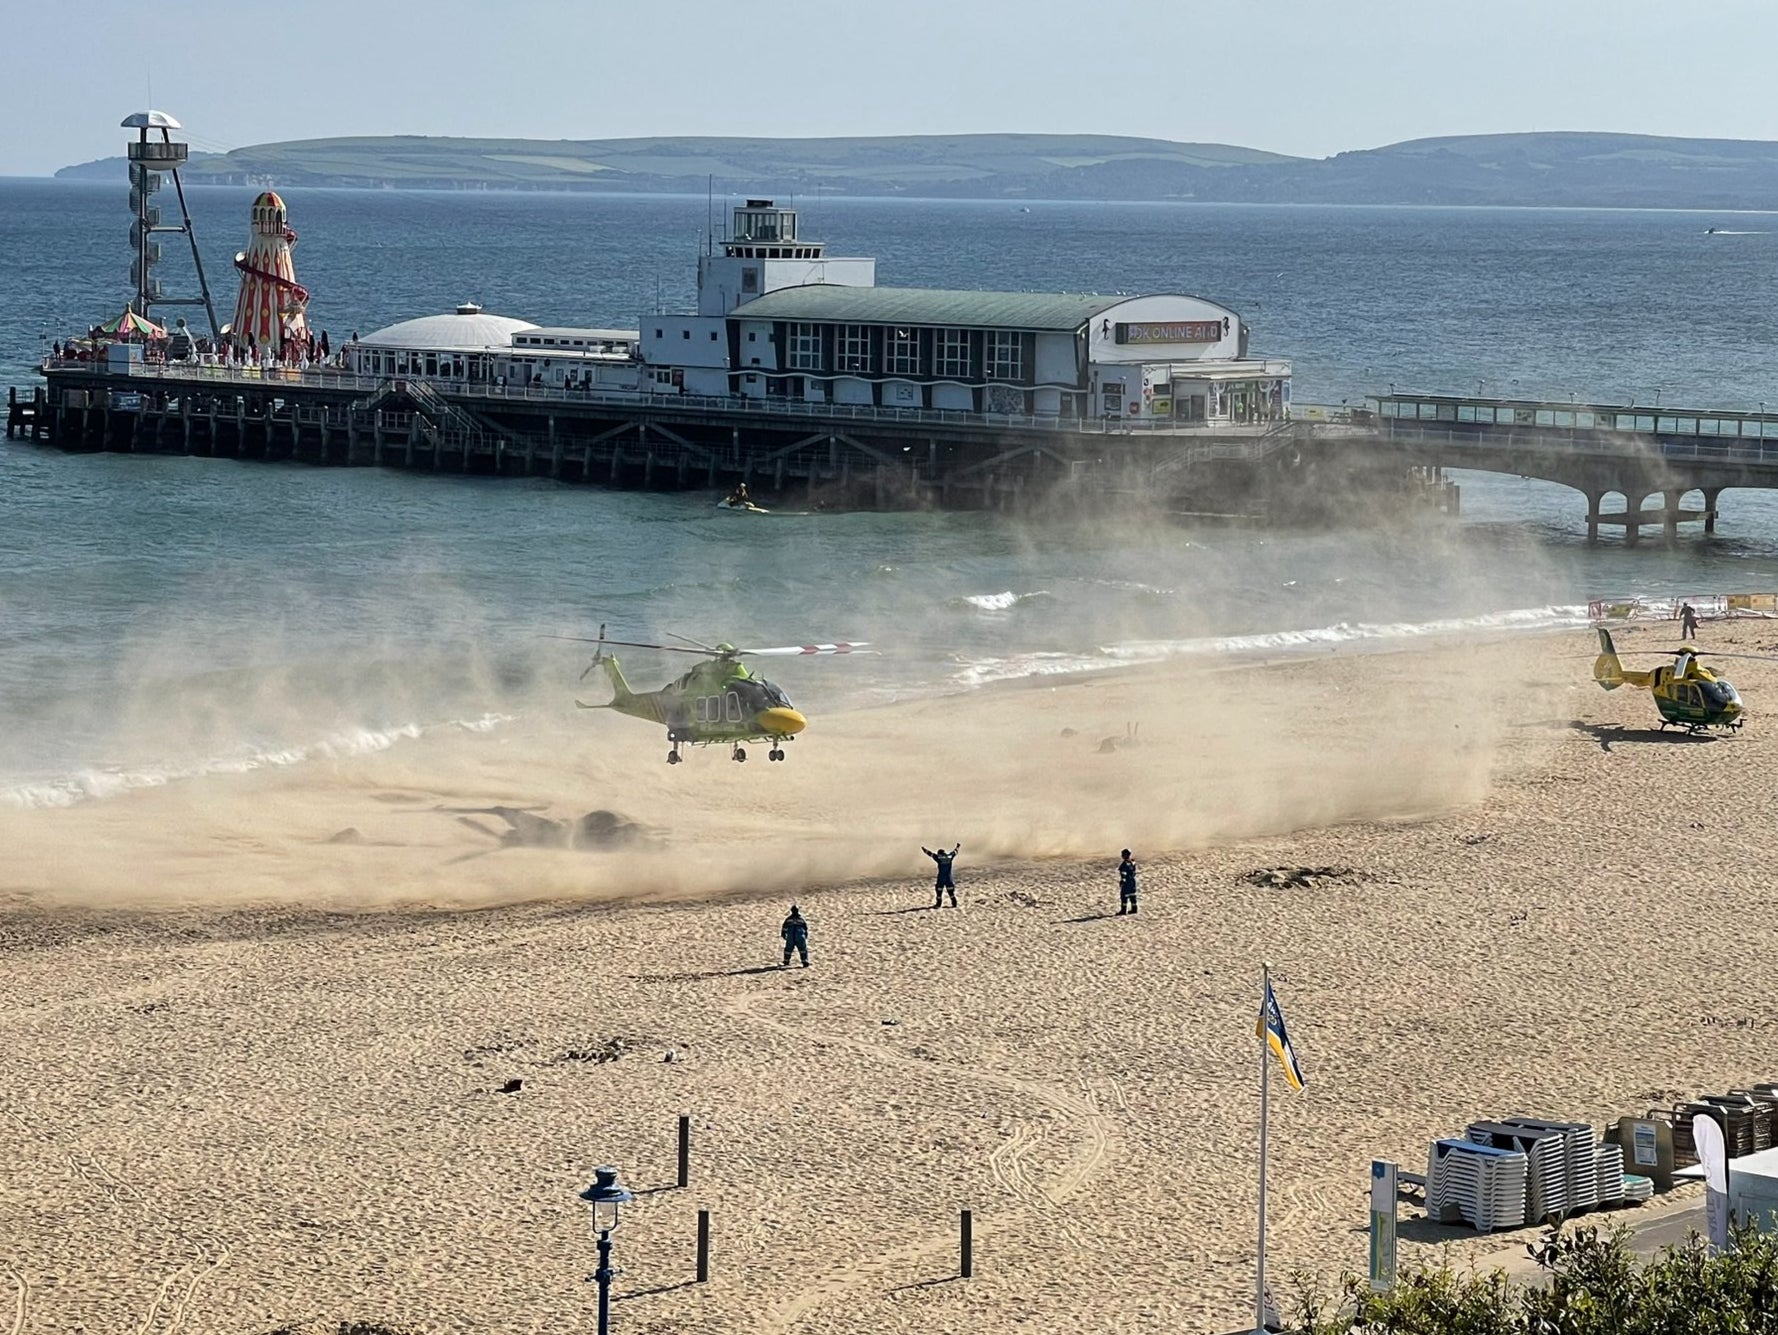 Bournemouth beach was cleared to allow two air ambulances to land